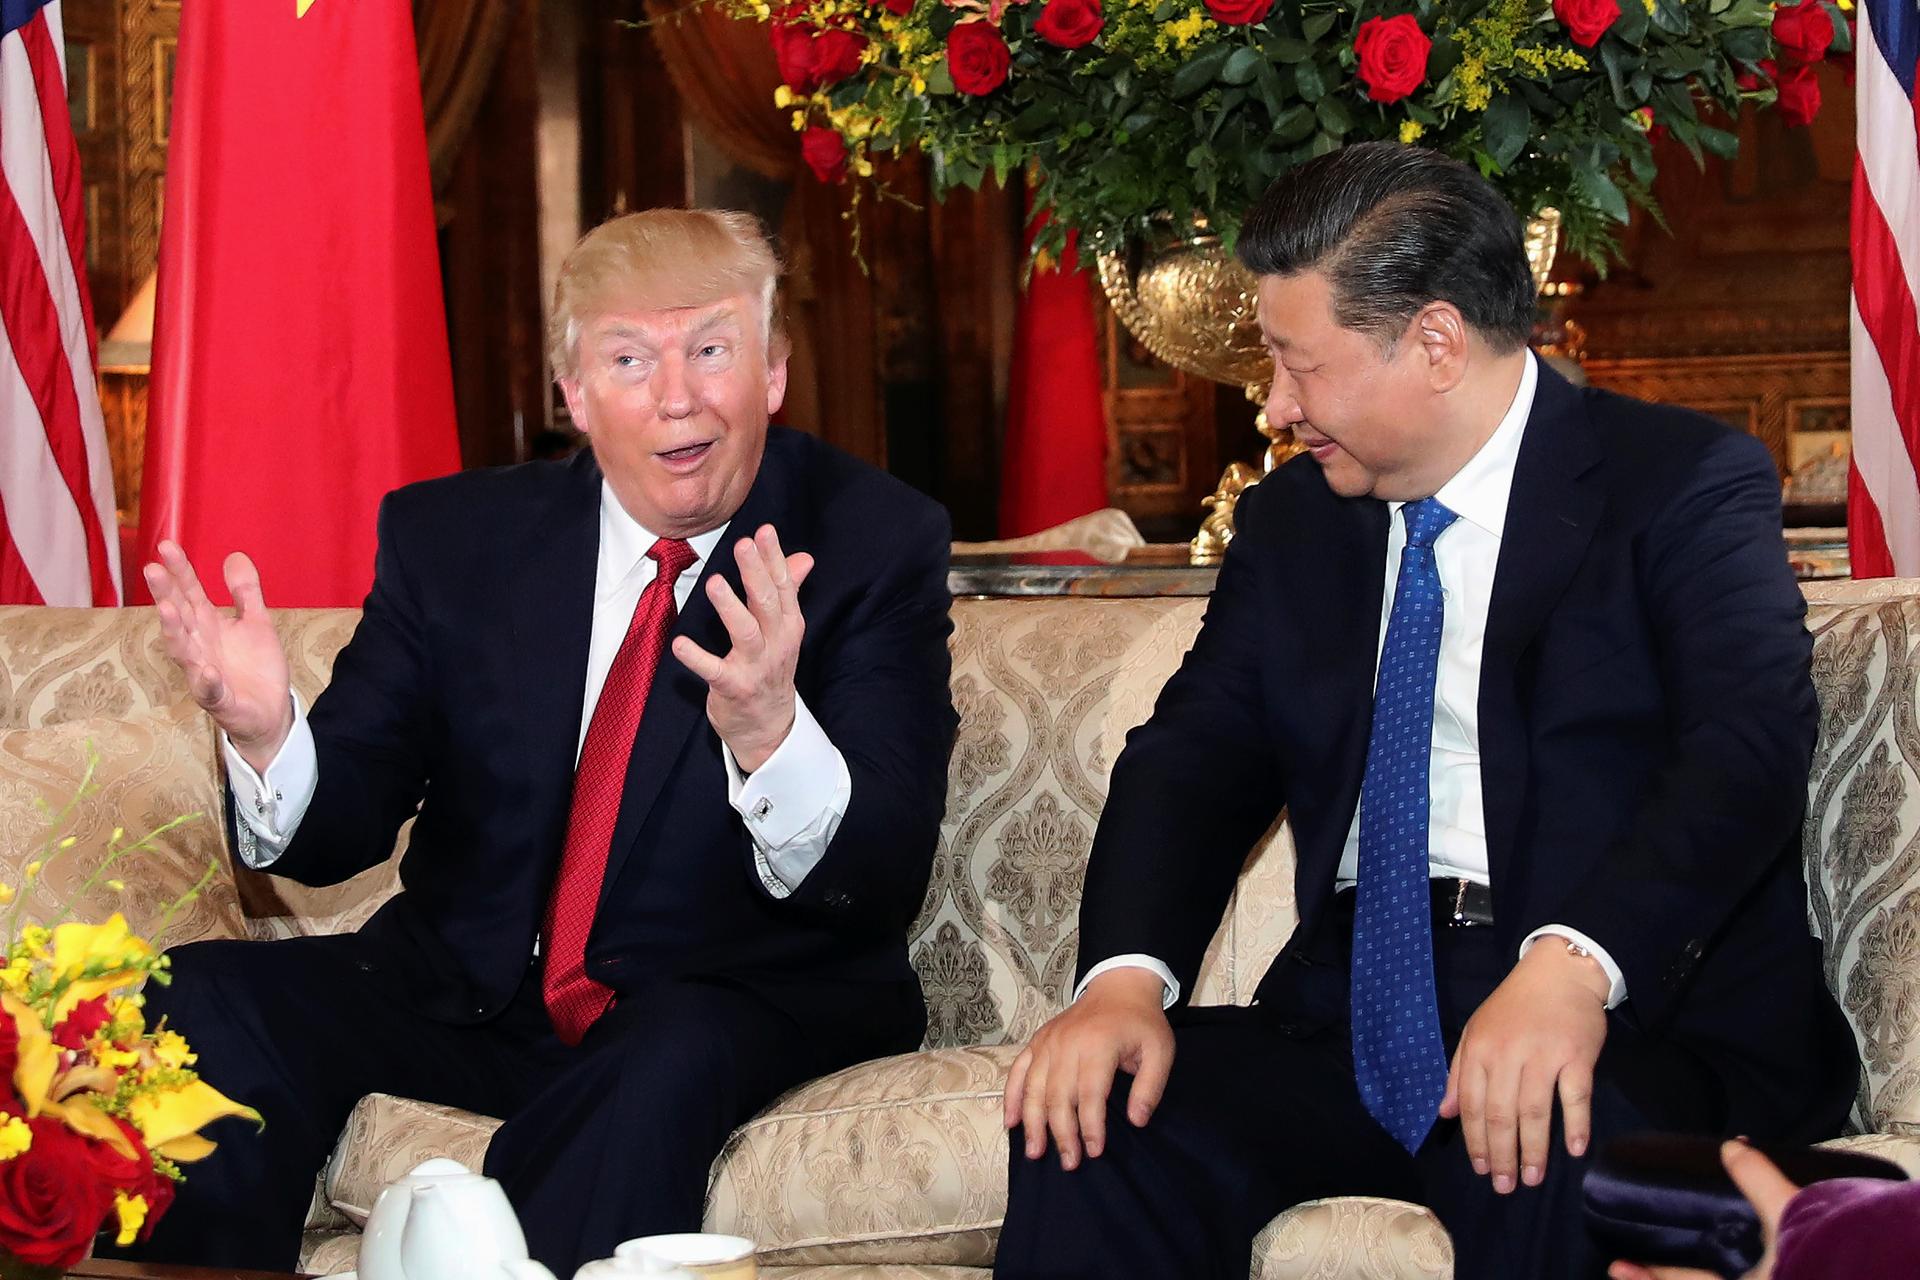 President Donald Trump meeting with Chinese President Xi Jinping at Mar-a-Lago, Florida, April 6th 2017 